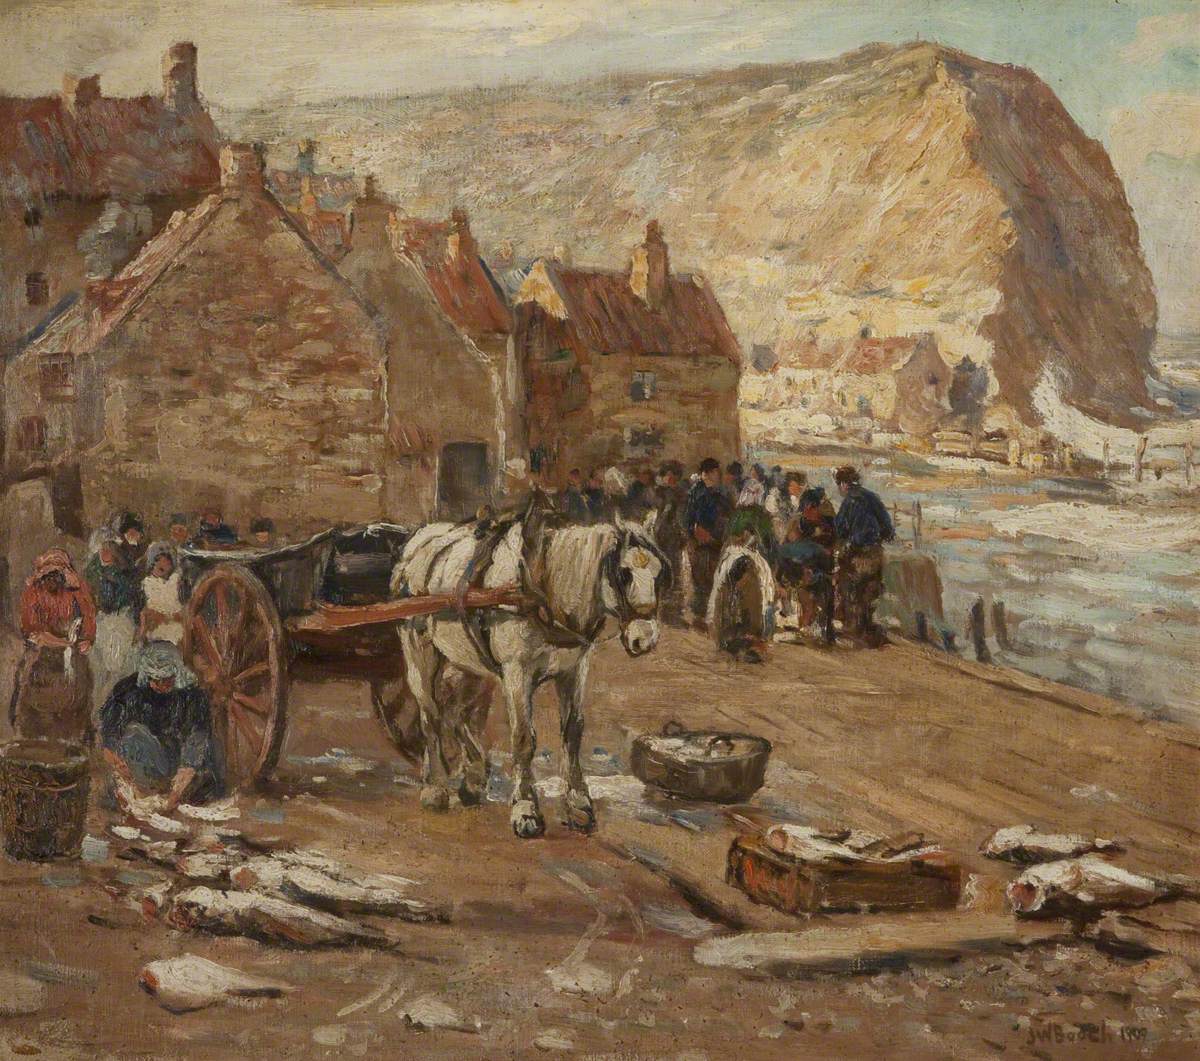 Fish Sales, Staithes